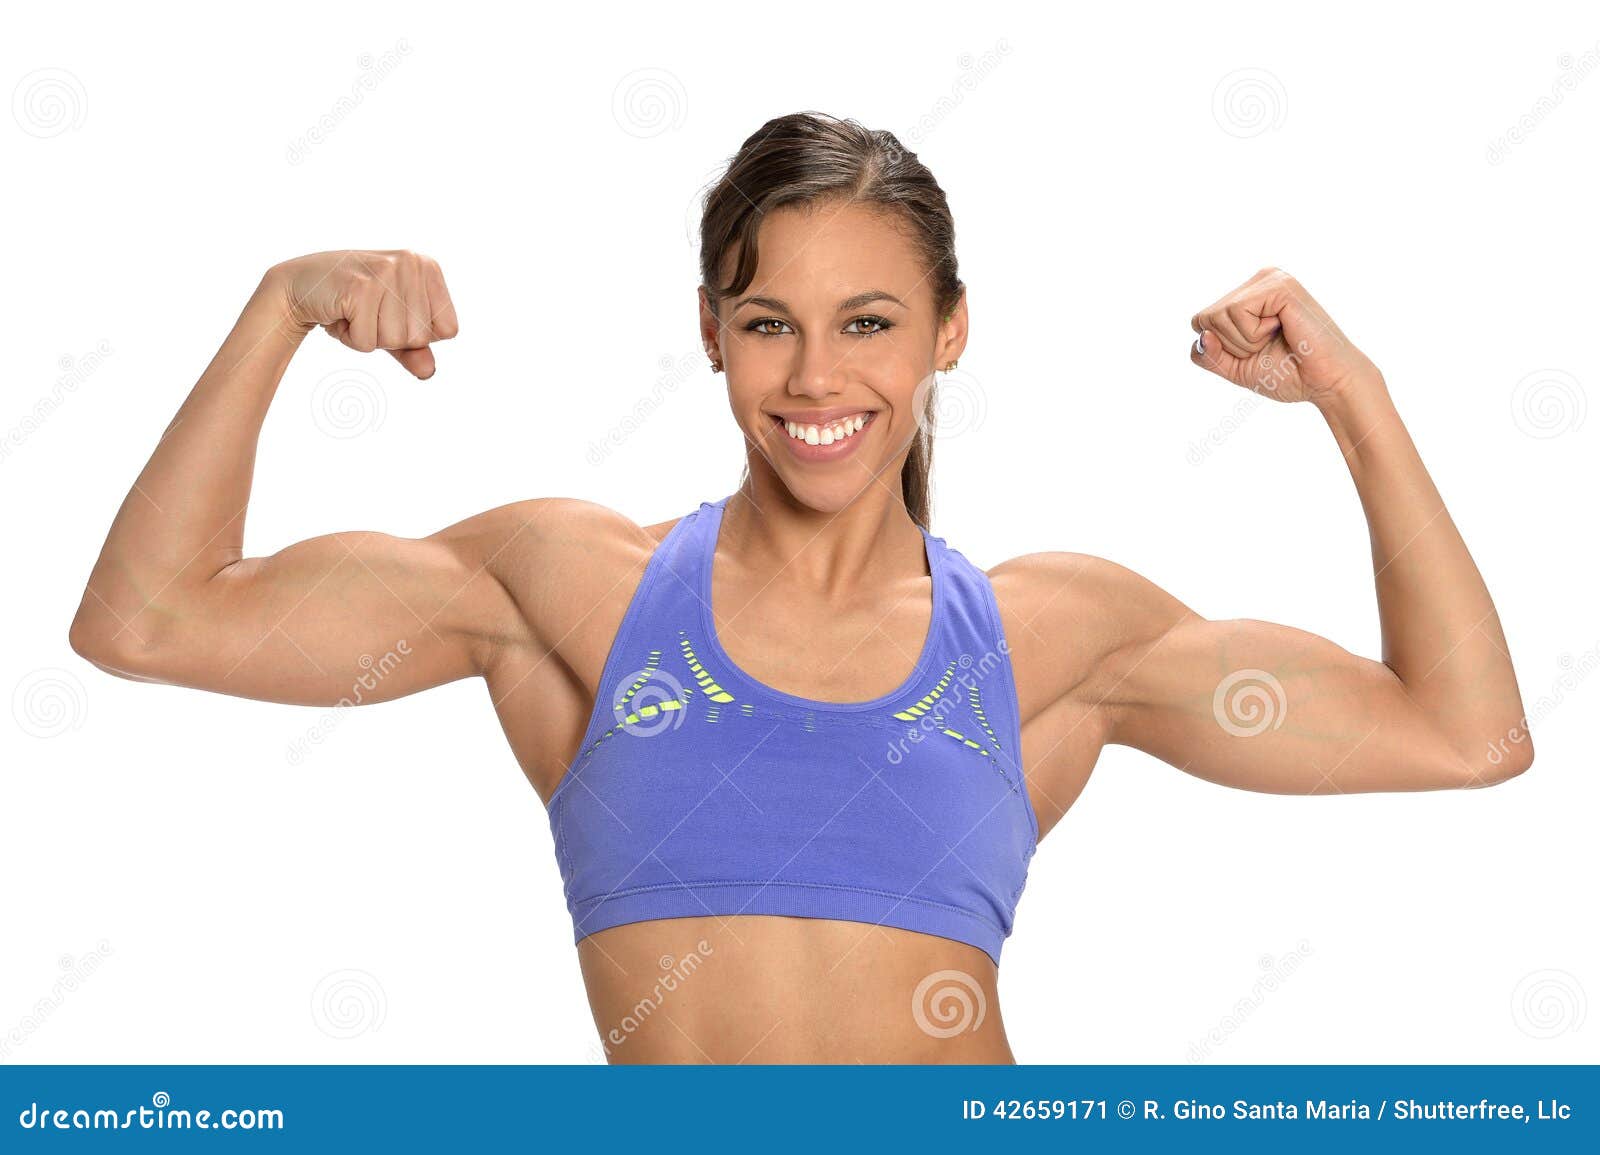 7,147 Woman Flexing Muscles Stock Photos - Free & Royalty-Free